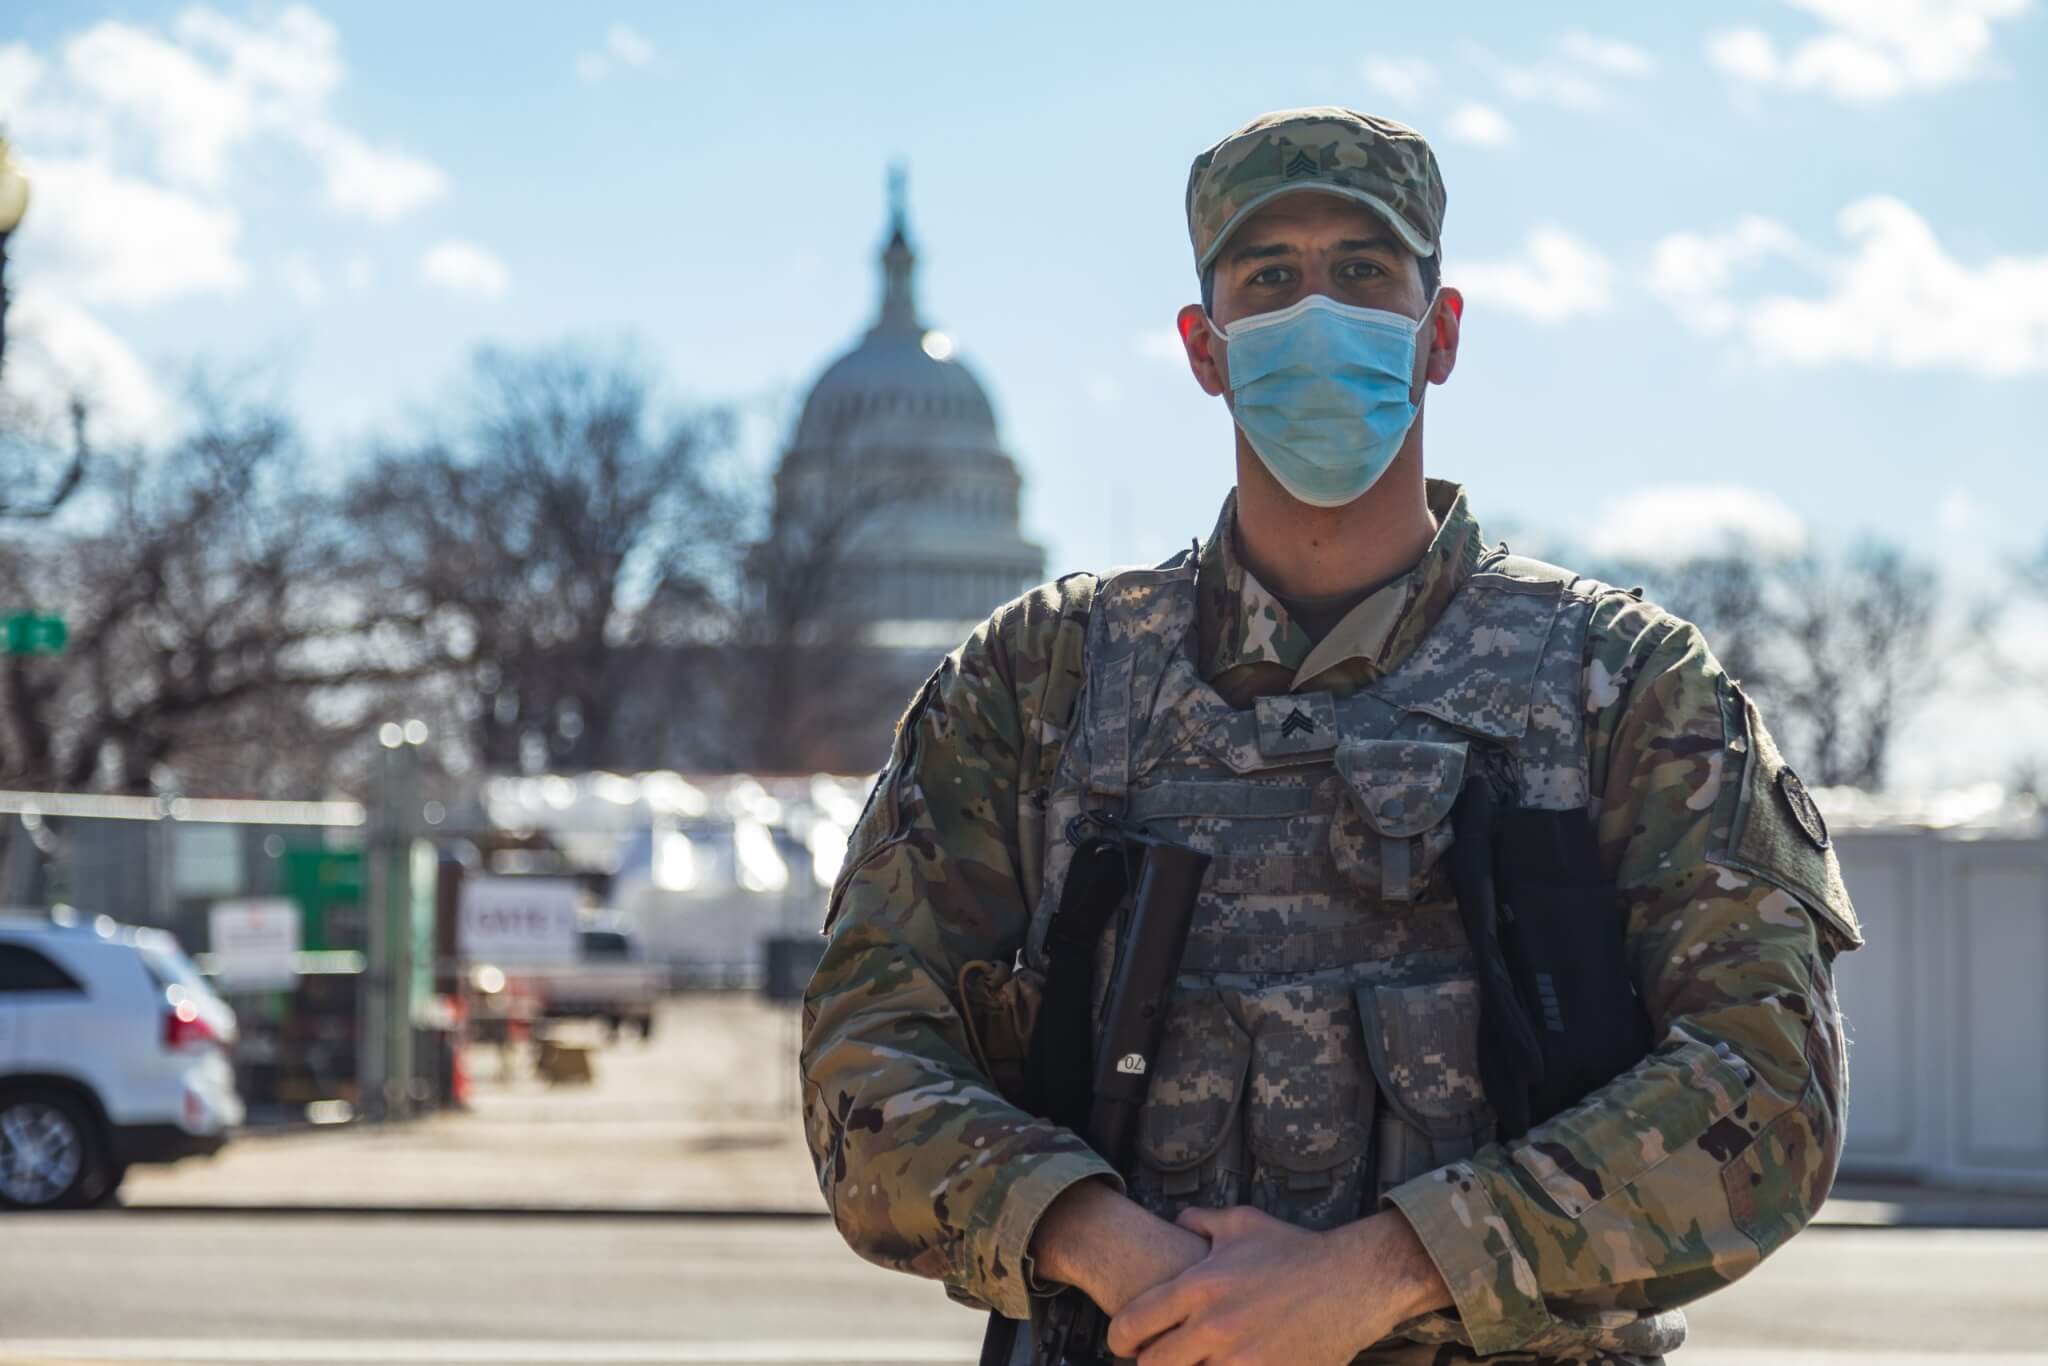 Sgt. Paulo Henriques, a calvary scout with the New Jersey Army National Guard’s Troop B, 1st Squadron 102nd Cavalry Regiment, provides sector security near the U.S. Capitol in Washington, D.C. The National Guard has been requested to continue supporting federal law enforcement agencies with security through mid-March. Photo by Sgt. Mathew Rosado